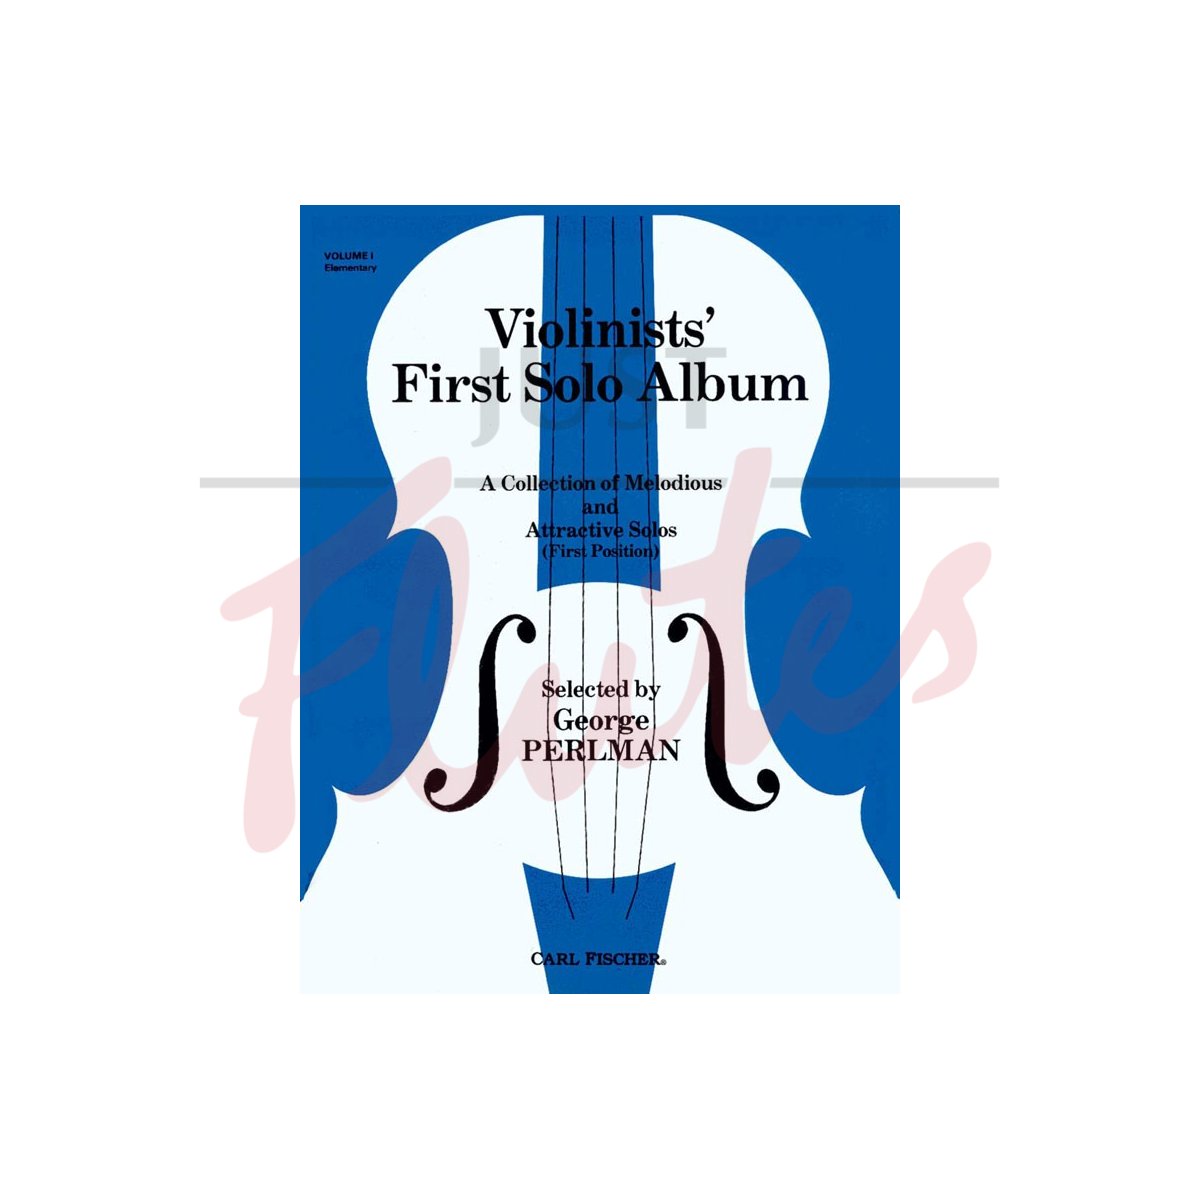 Violinists' First Solo Album